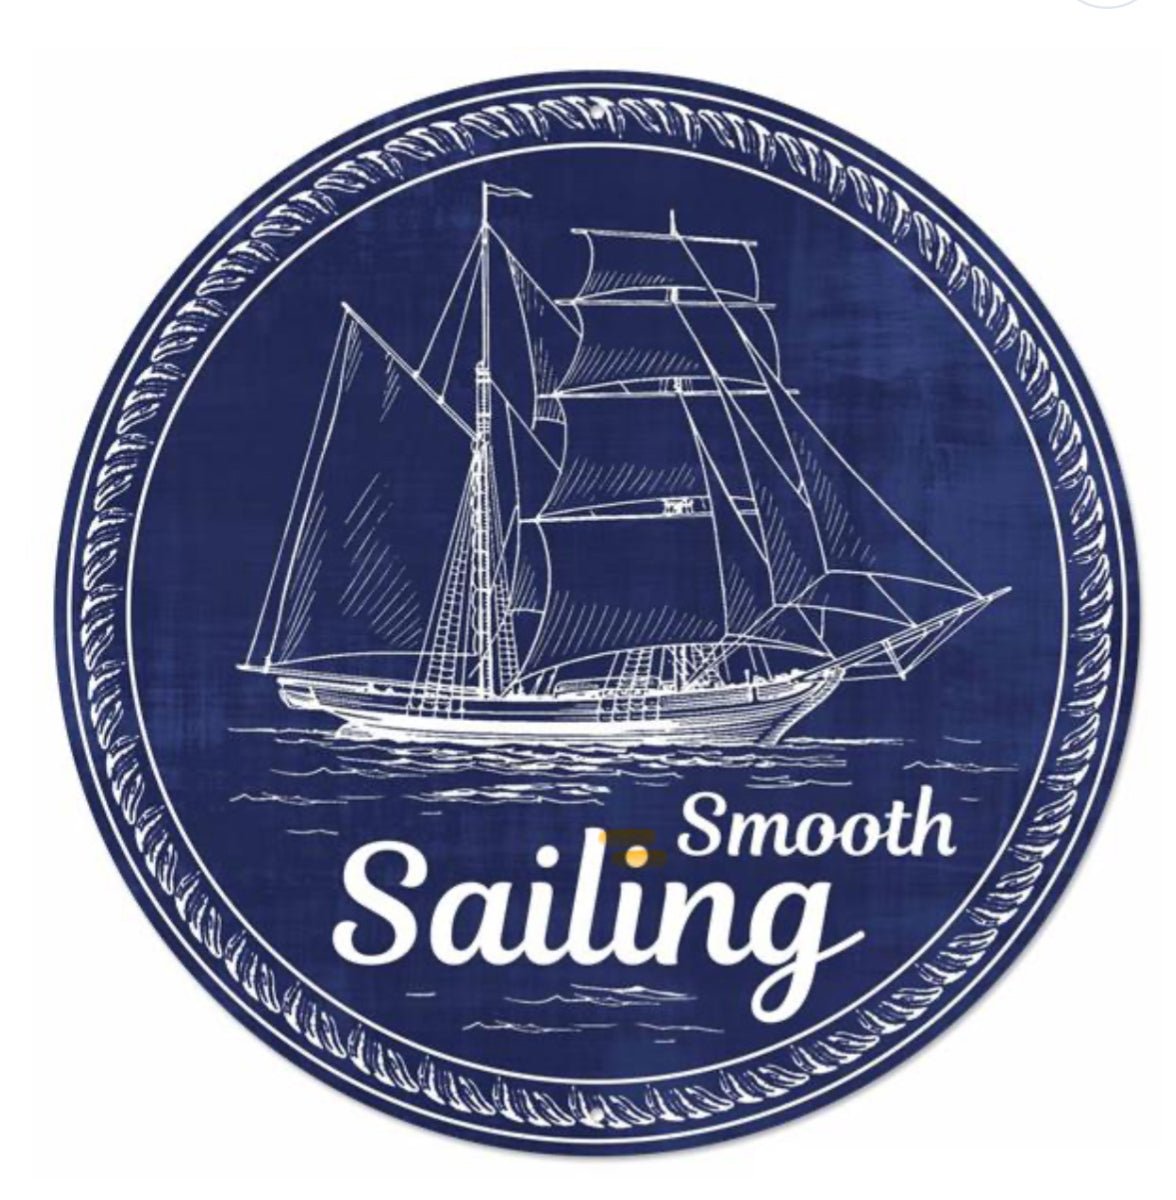 Smooth sailing round metalsign - Greenery Marketsigns for wreathsMd1274